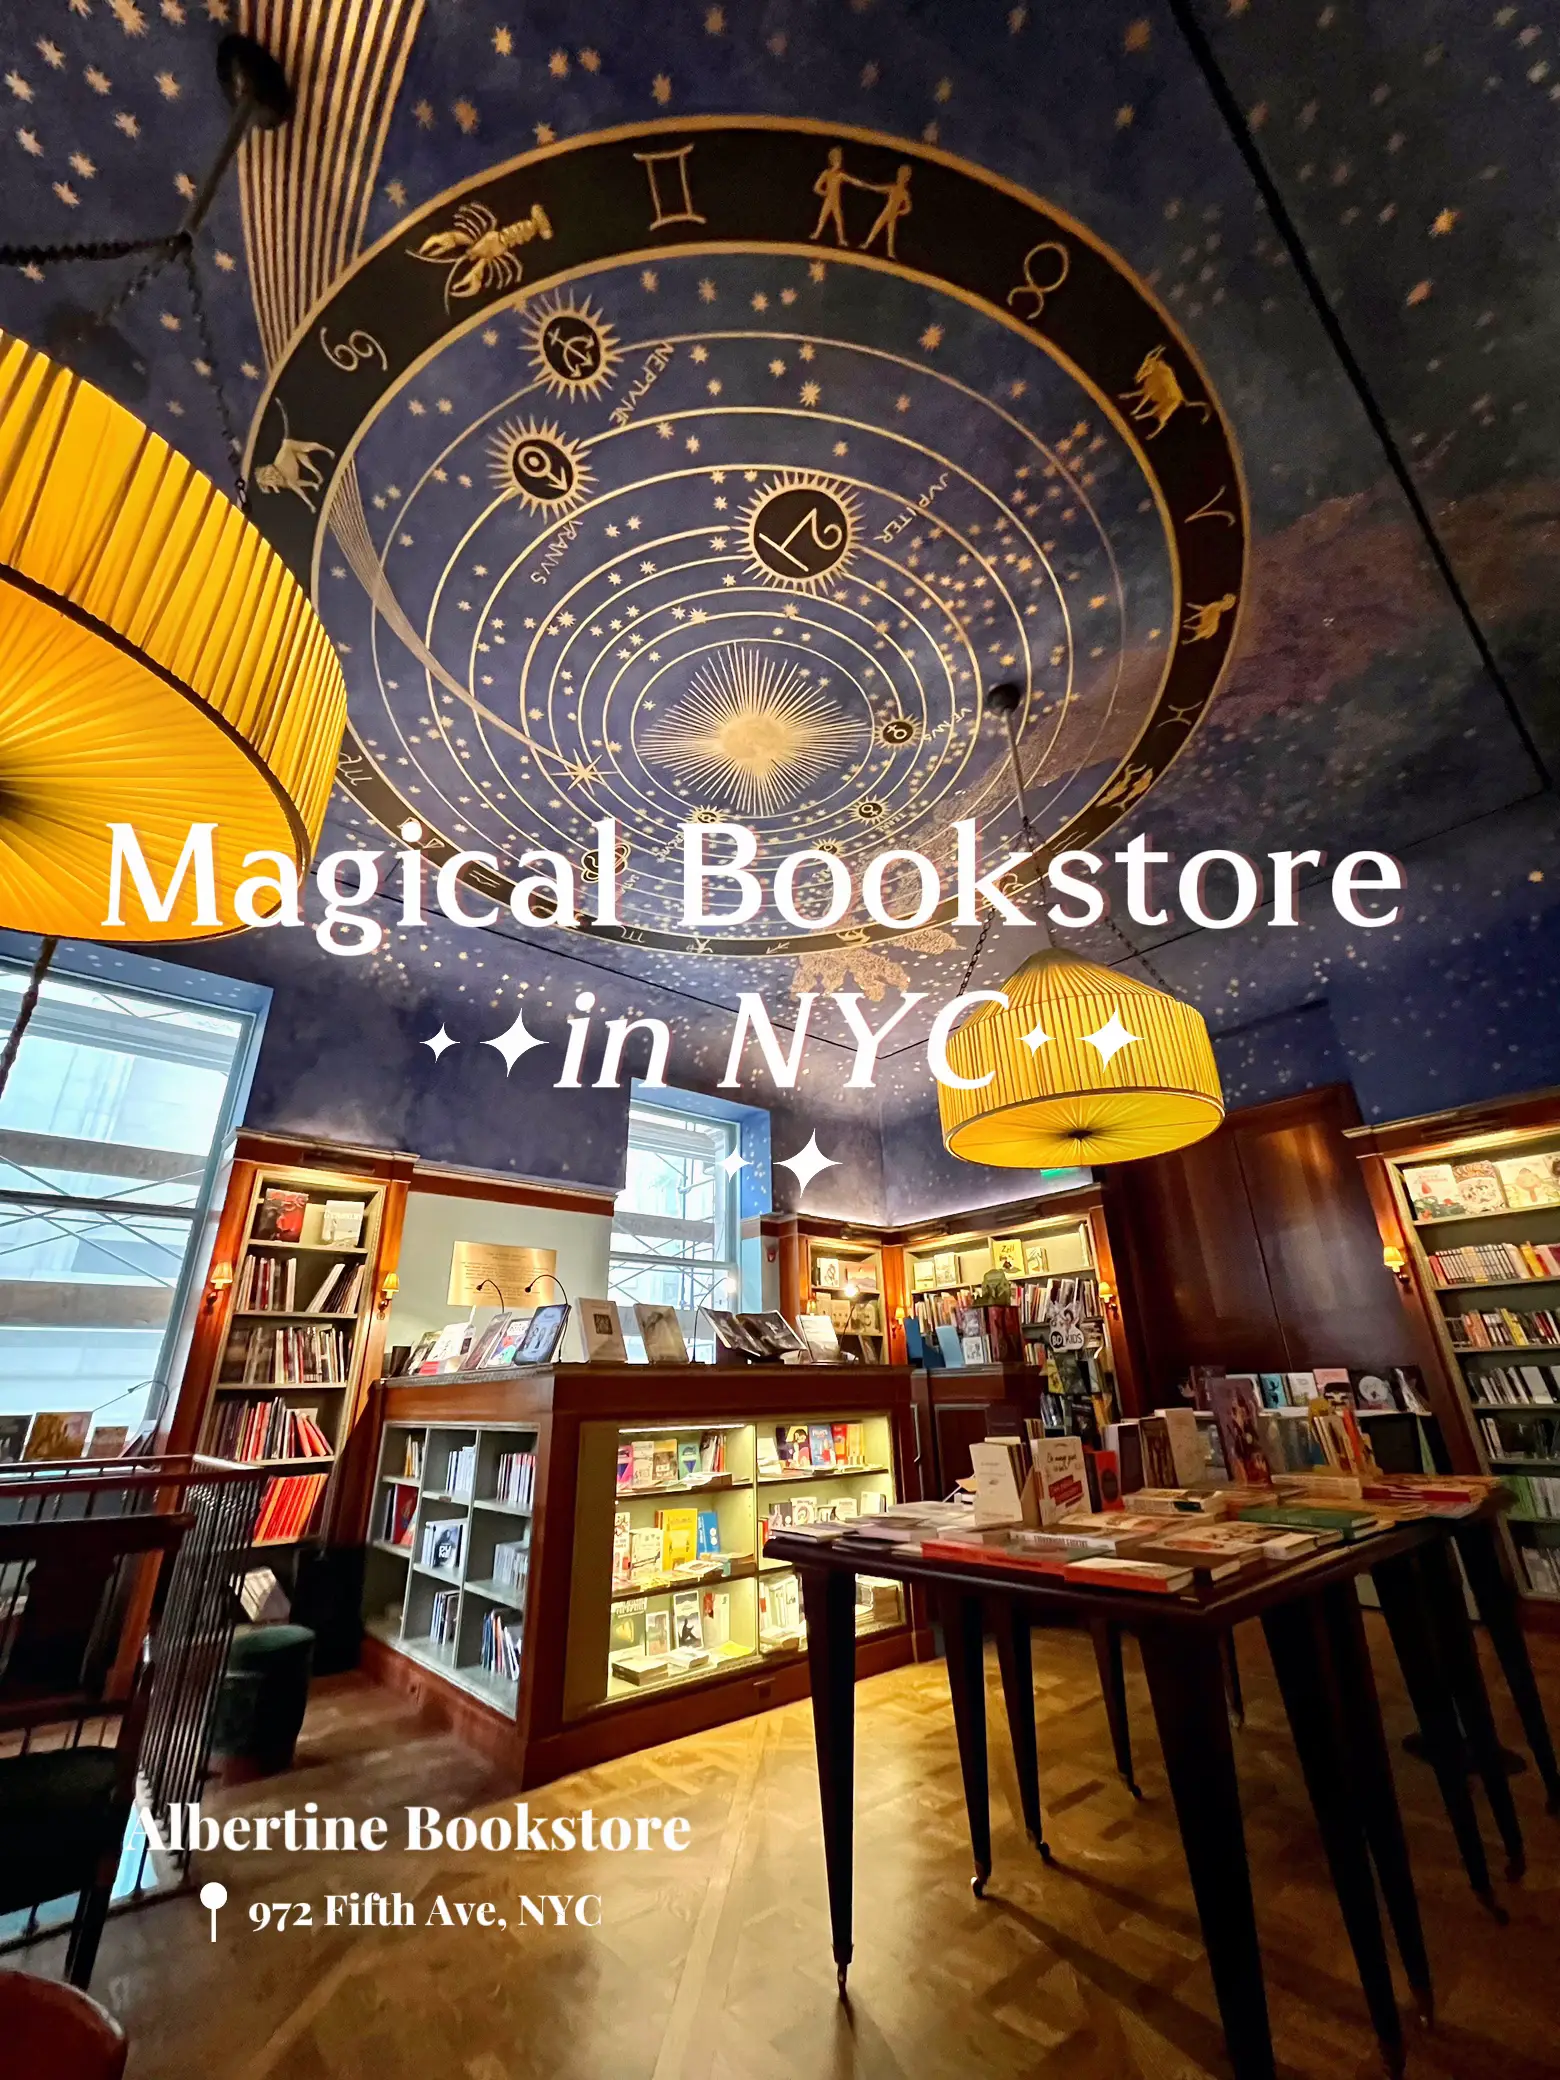  A bookstore with a large bookshelf and a sign that says "Magical Bookstore in NYC".